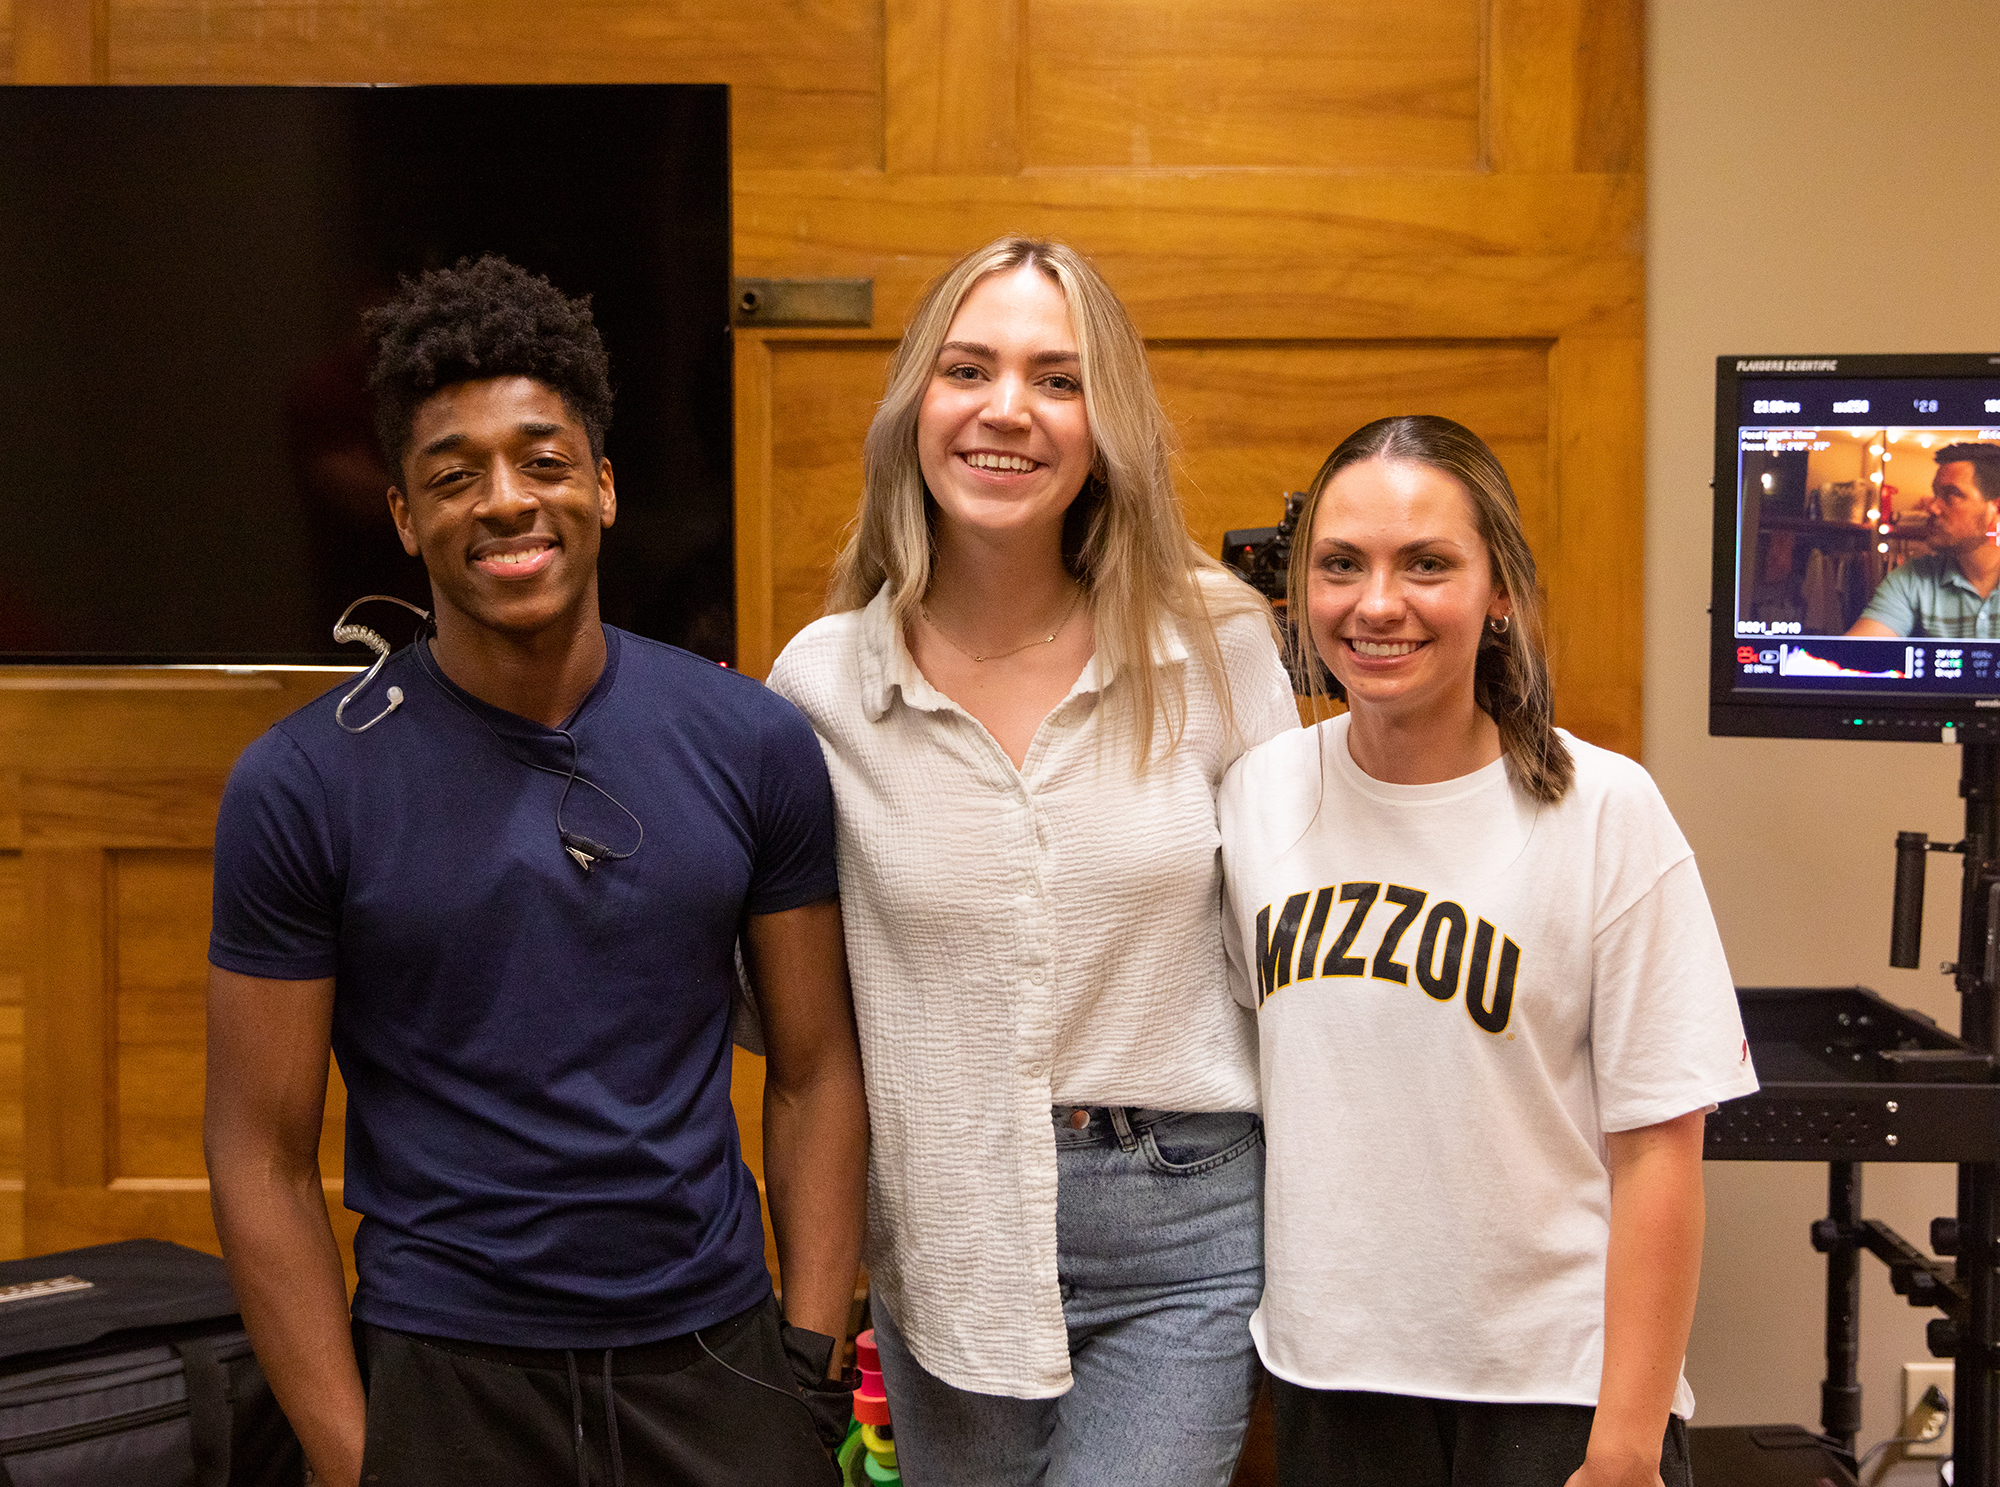 Ty Small, Olivia Jansen and Hunter Mesko pose on set. Mesko is the commercials’ main character, and Small and Jansen make brief cameos. Can you spot them?